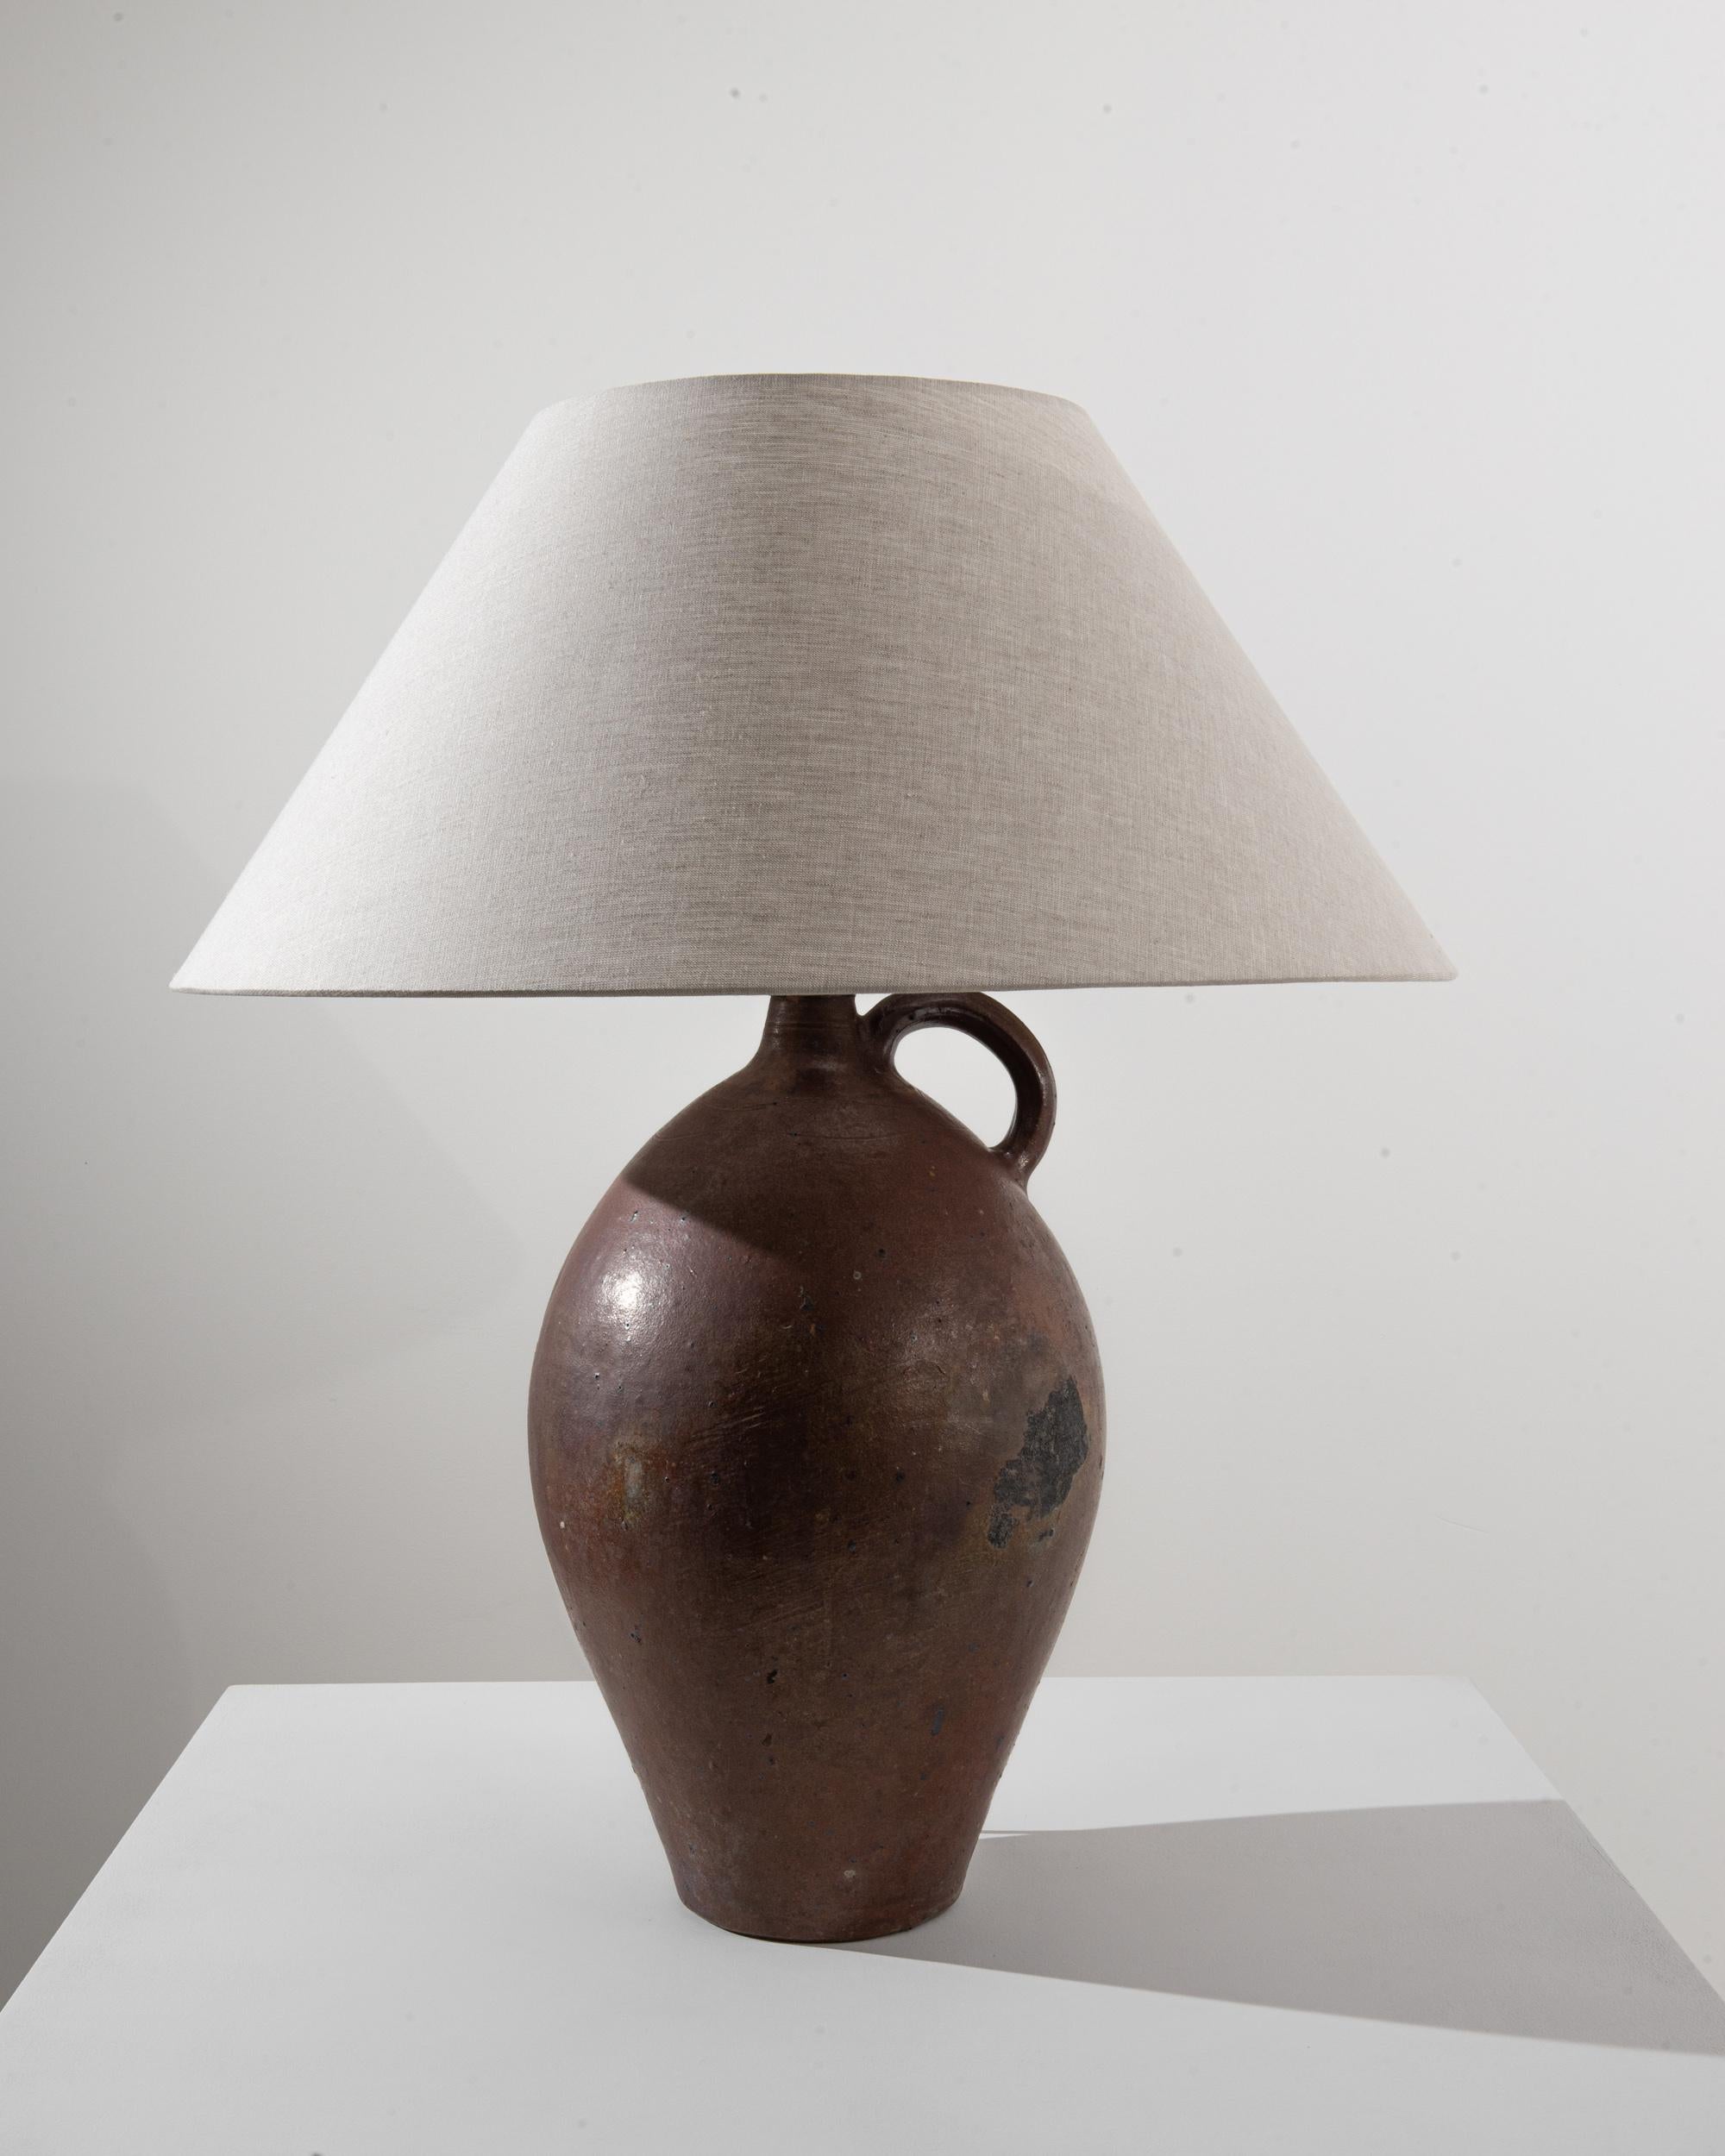 A 20th century ceramic table lamp produced in Belgium, this antique pottery piece is magnetized with haptic force. Made of a large repurposed pitcher with a handle and a chiffon shade, this warm light displays a full body in a lush chocolate tone,